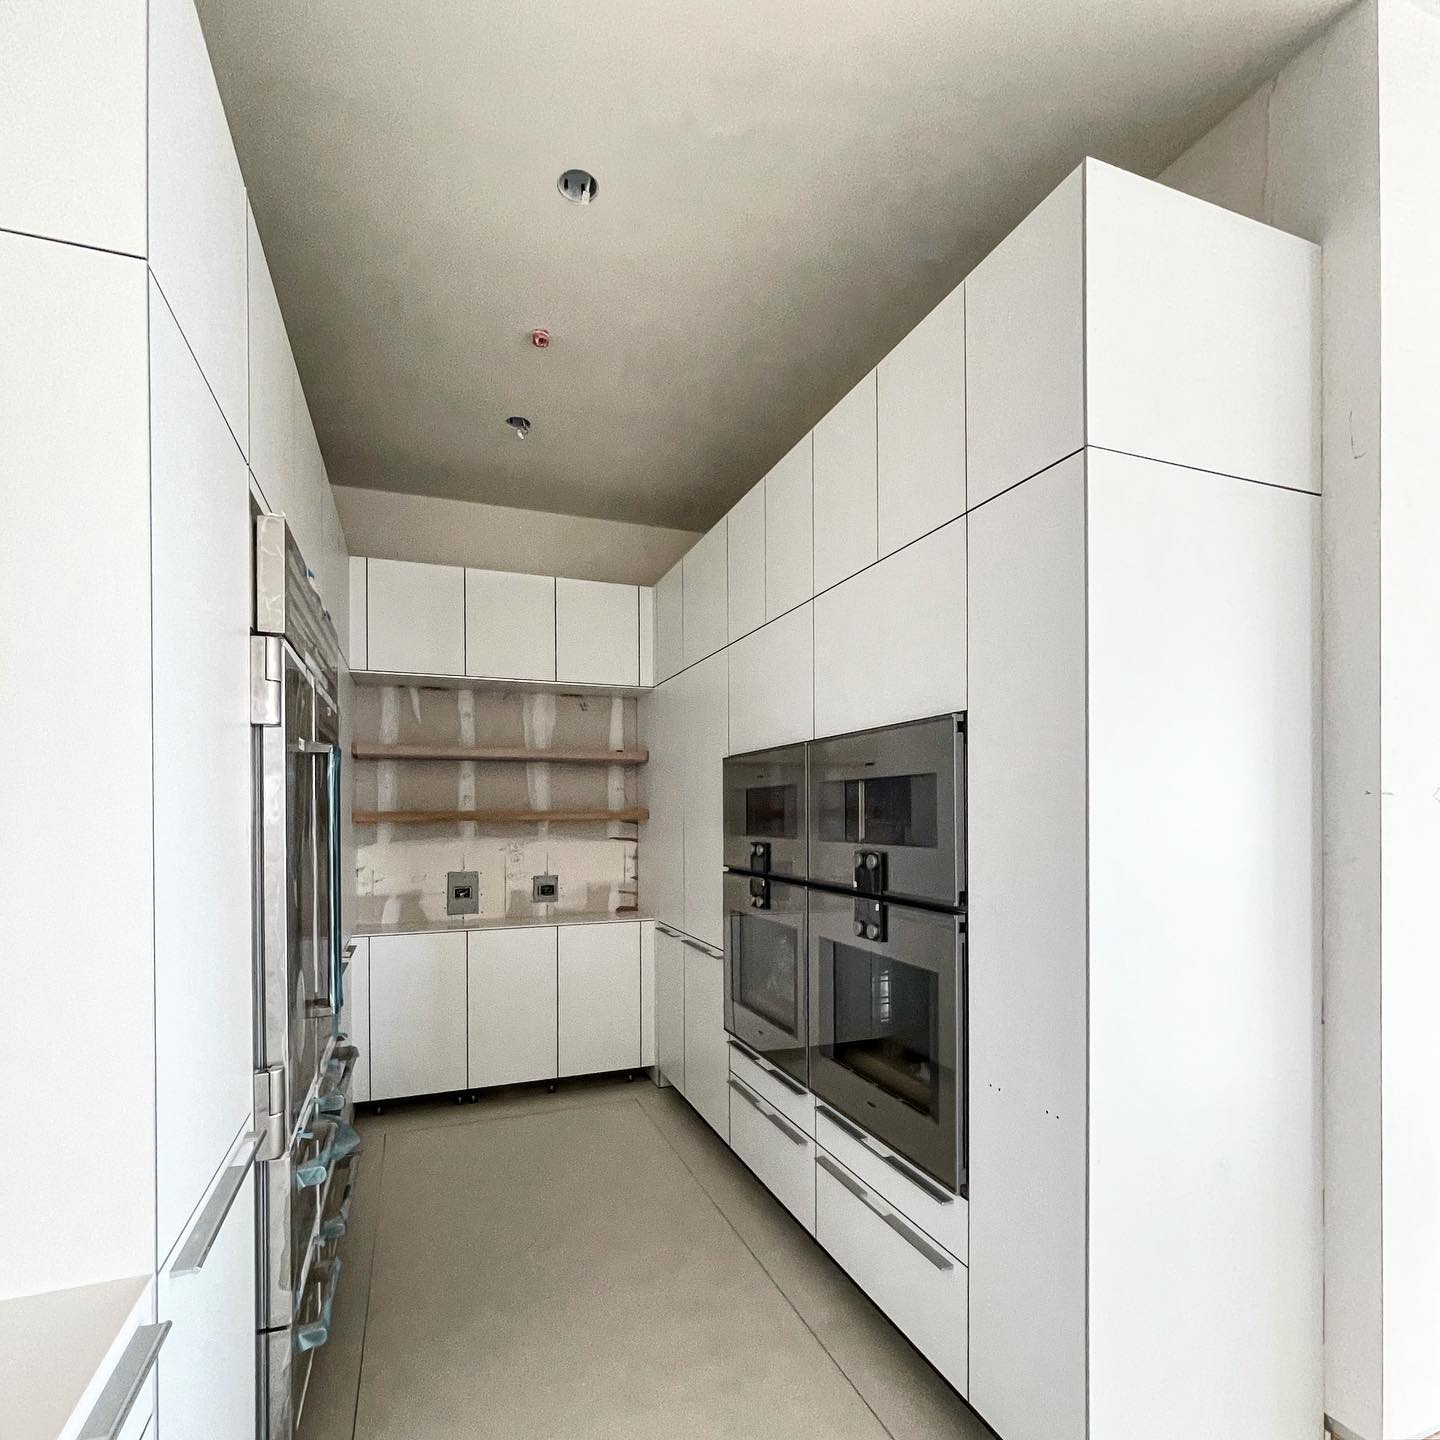 There are kitchens, and then there’s this. Take a look at the Terrazzo floors and the Schluter that divides the layout of the home… #scottgillendesign #thecase #midcenturymodern #theflat